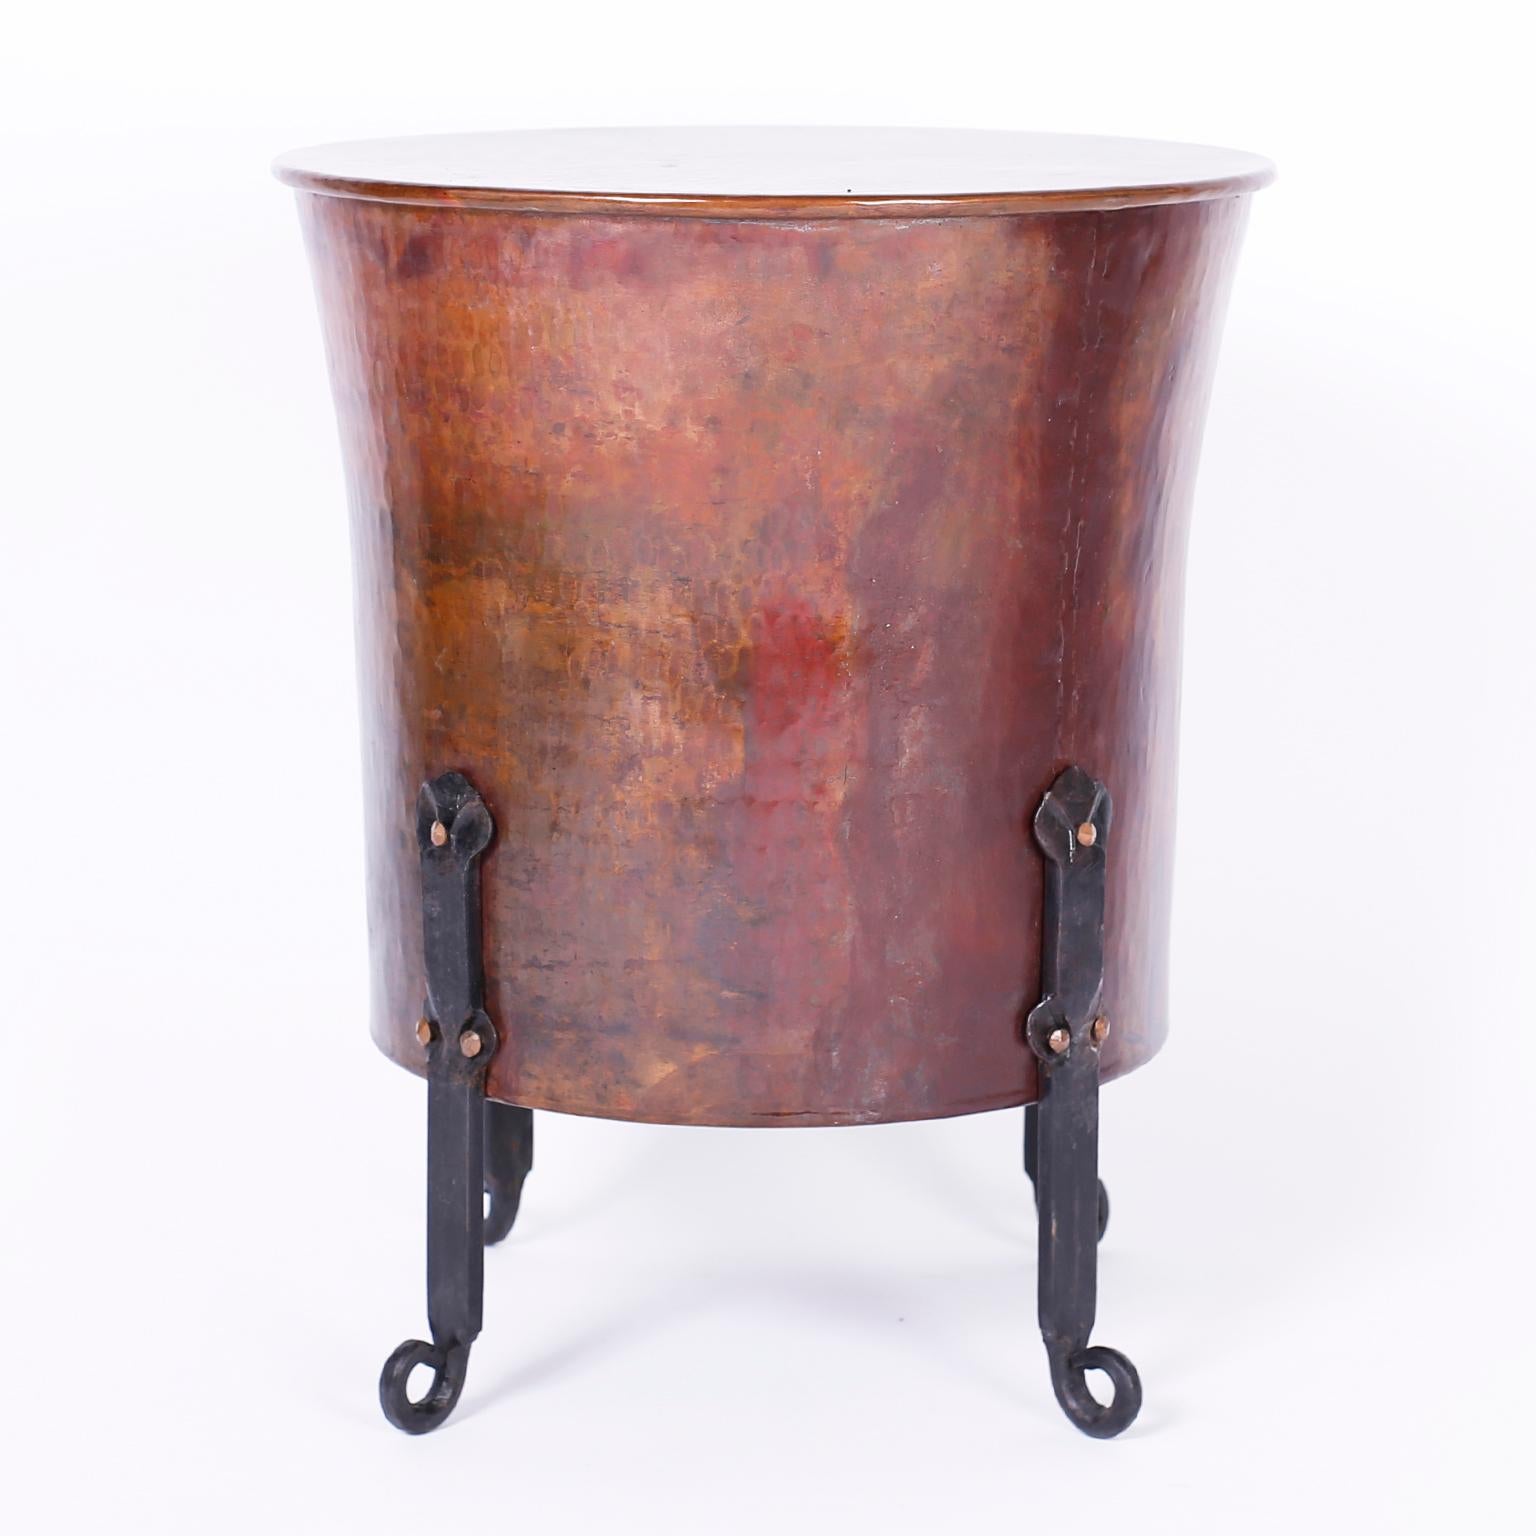 Pair of copper and Iron stands with hand-hammered copper tapered drums having acquired a lofty patina and riveted to four hammered graceful iron legs. We have another pair available if you are looking for 4 tables.